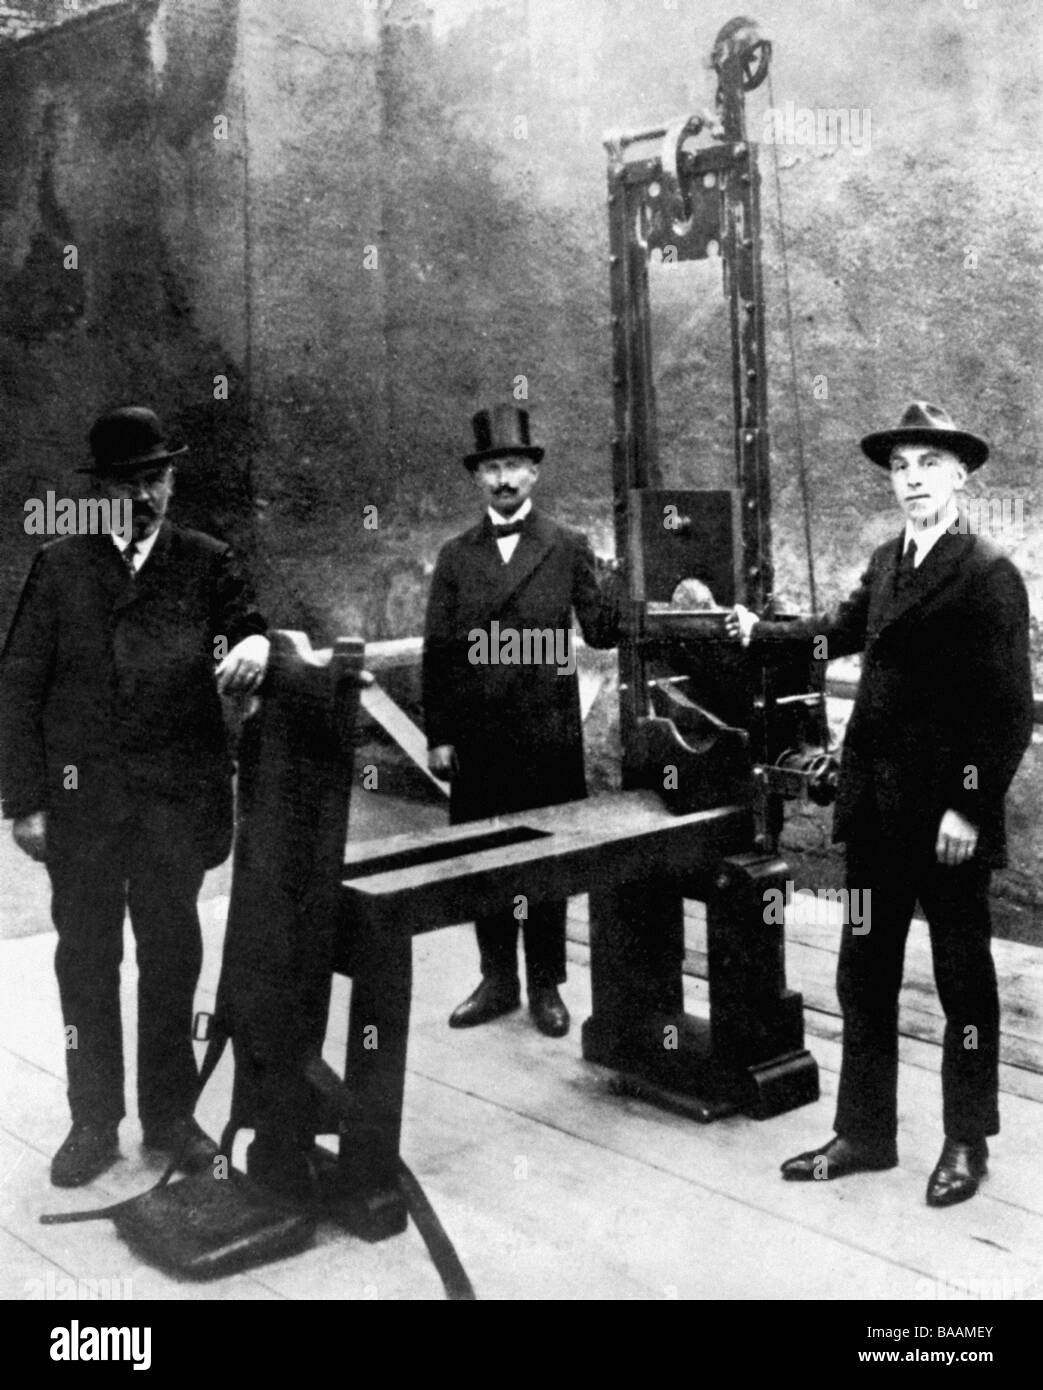 Kneissl, Matthias, 12.5.1875 - 21.2.1902, Bavarian criminal, guillotine with which he was executed in Augsburg, beside it judge Franz Xaver Reichhart (centre), Stock Photo